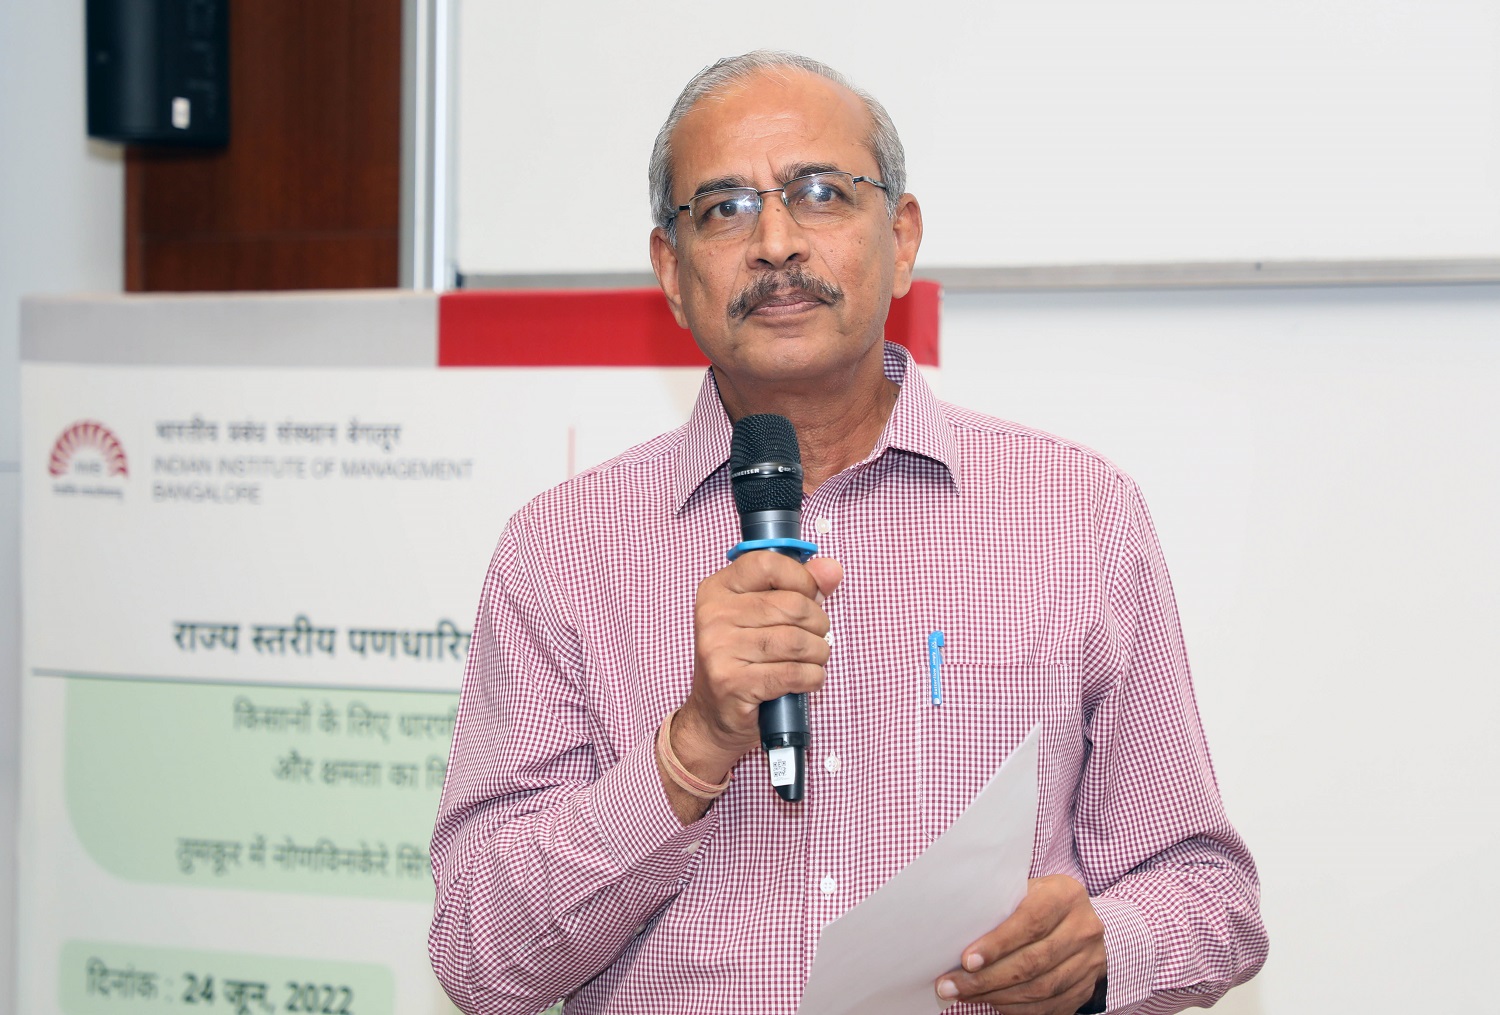 Prof. K. V. Raju, Professor Emeritus and Dean-Research, Chanakya University and Former Economic Adviser to Chief Ministers of Karnataka and Uttar Pradesh speaks on ‘Improving the water use efficiency for sustainable agriculture’.